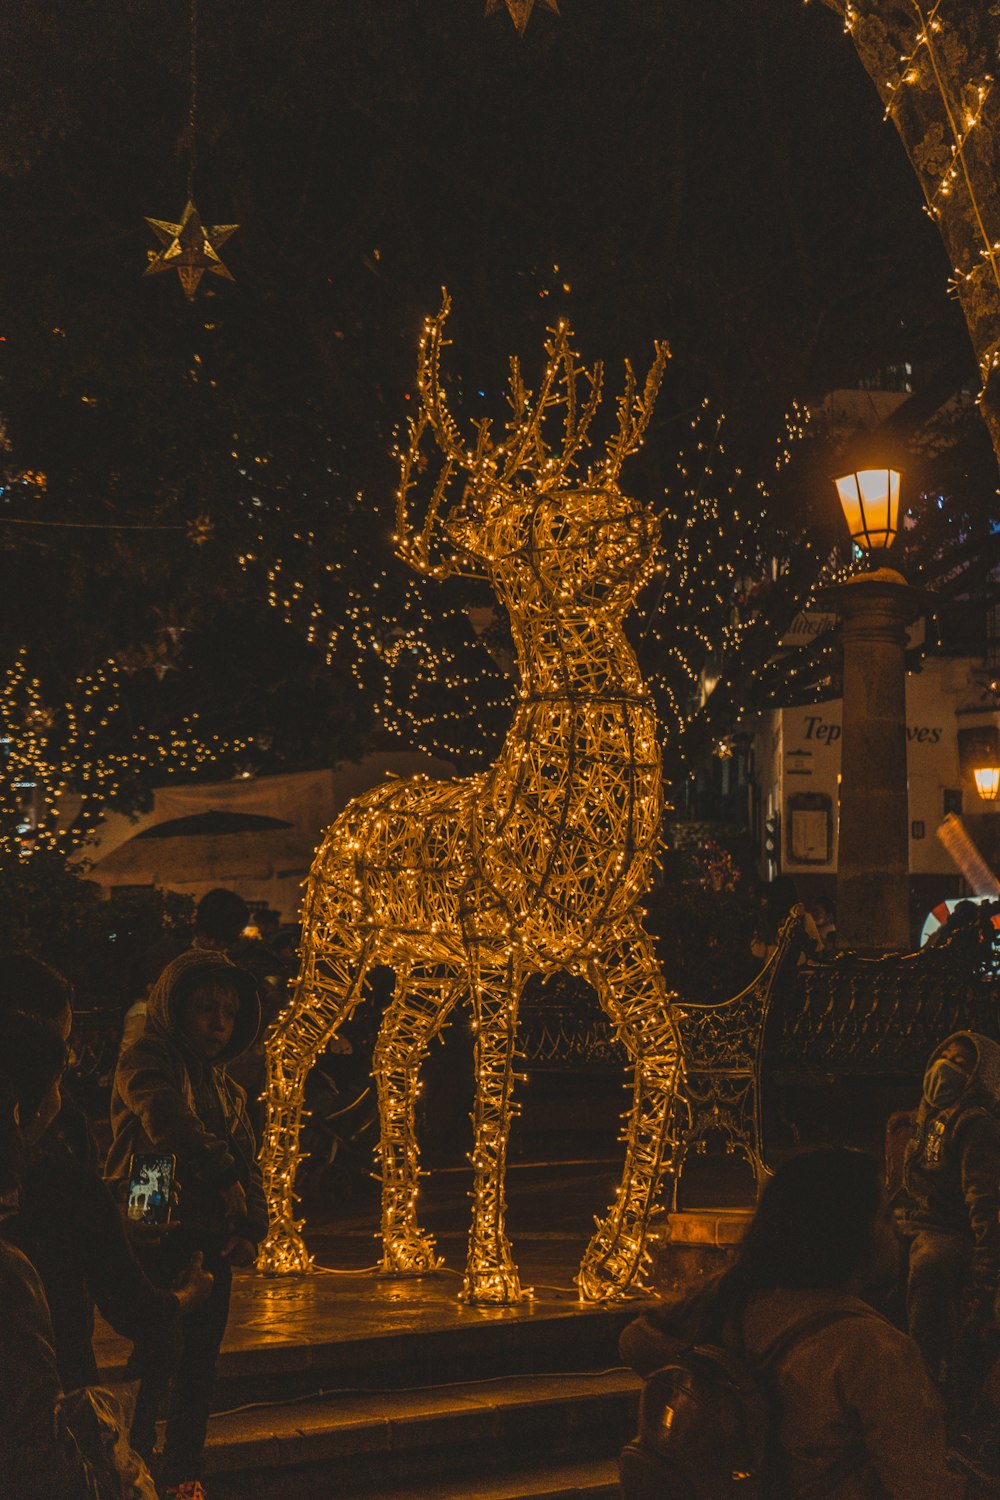 lighted deer statue during night time